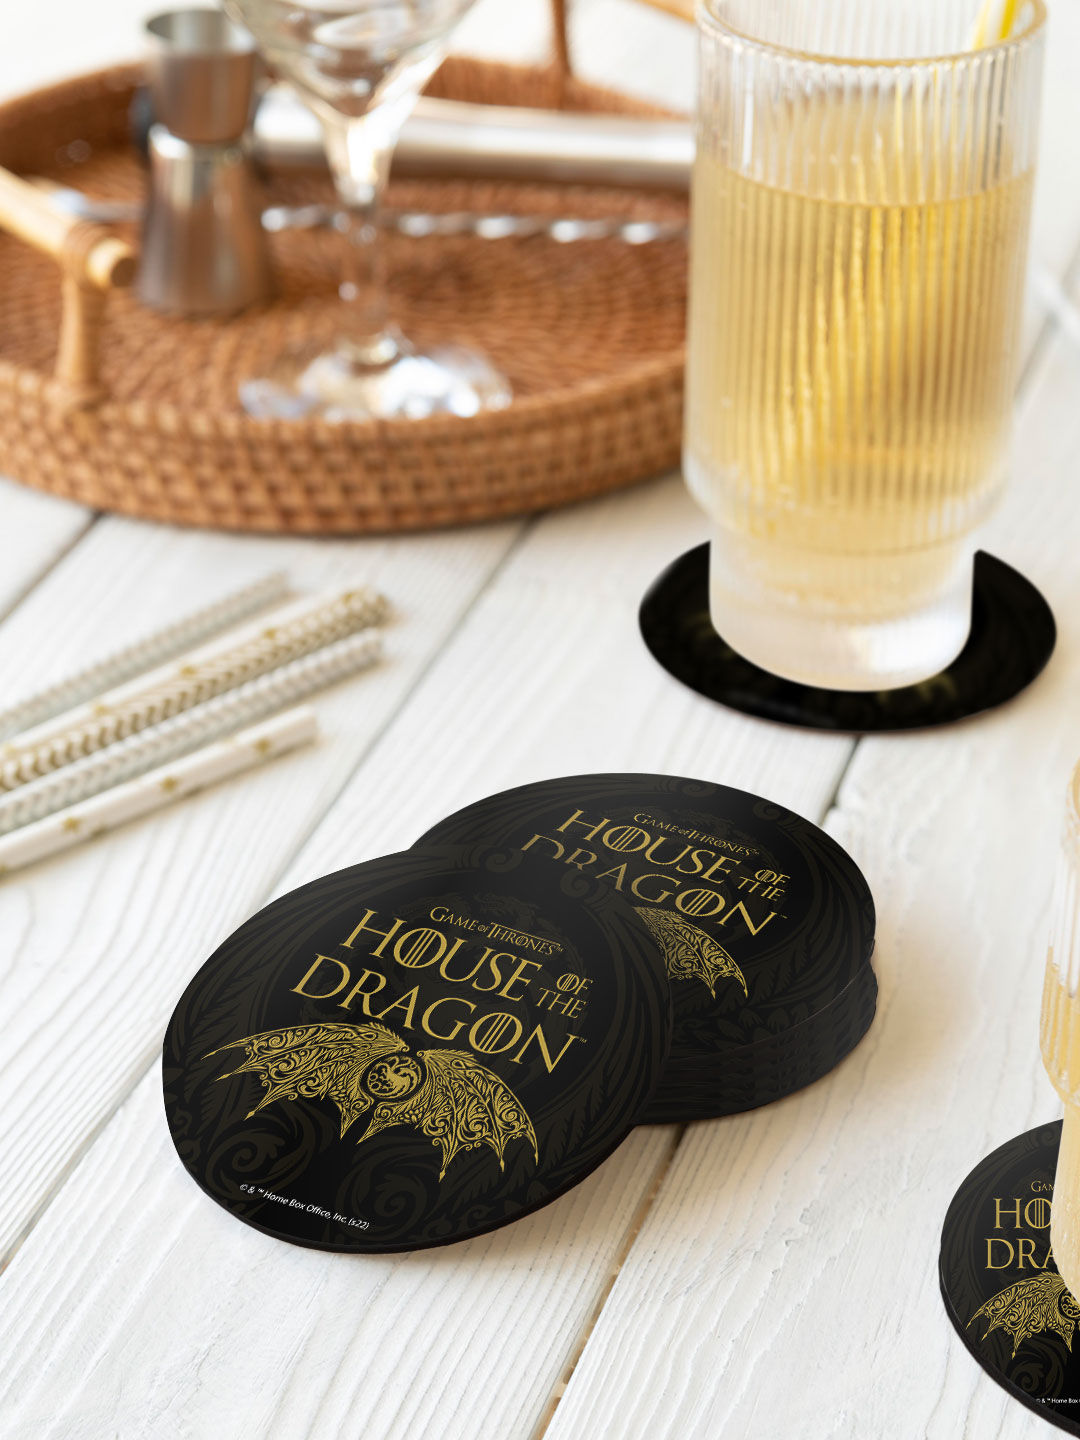 Game of Thrones Gifts: Den of Geek's 2019 Holiday Gift Guide | Den of Geek